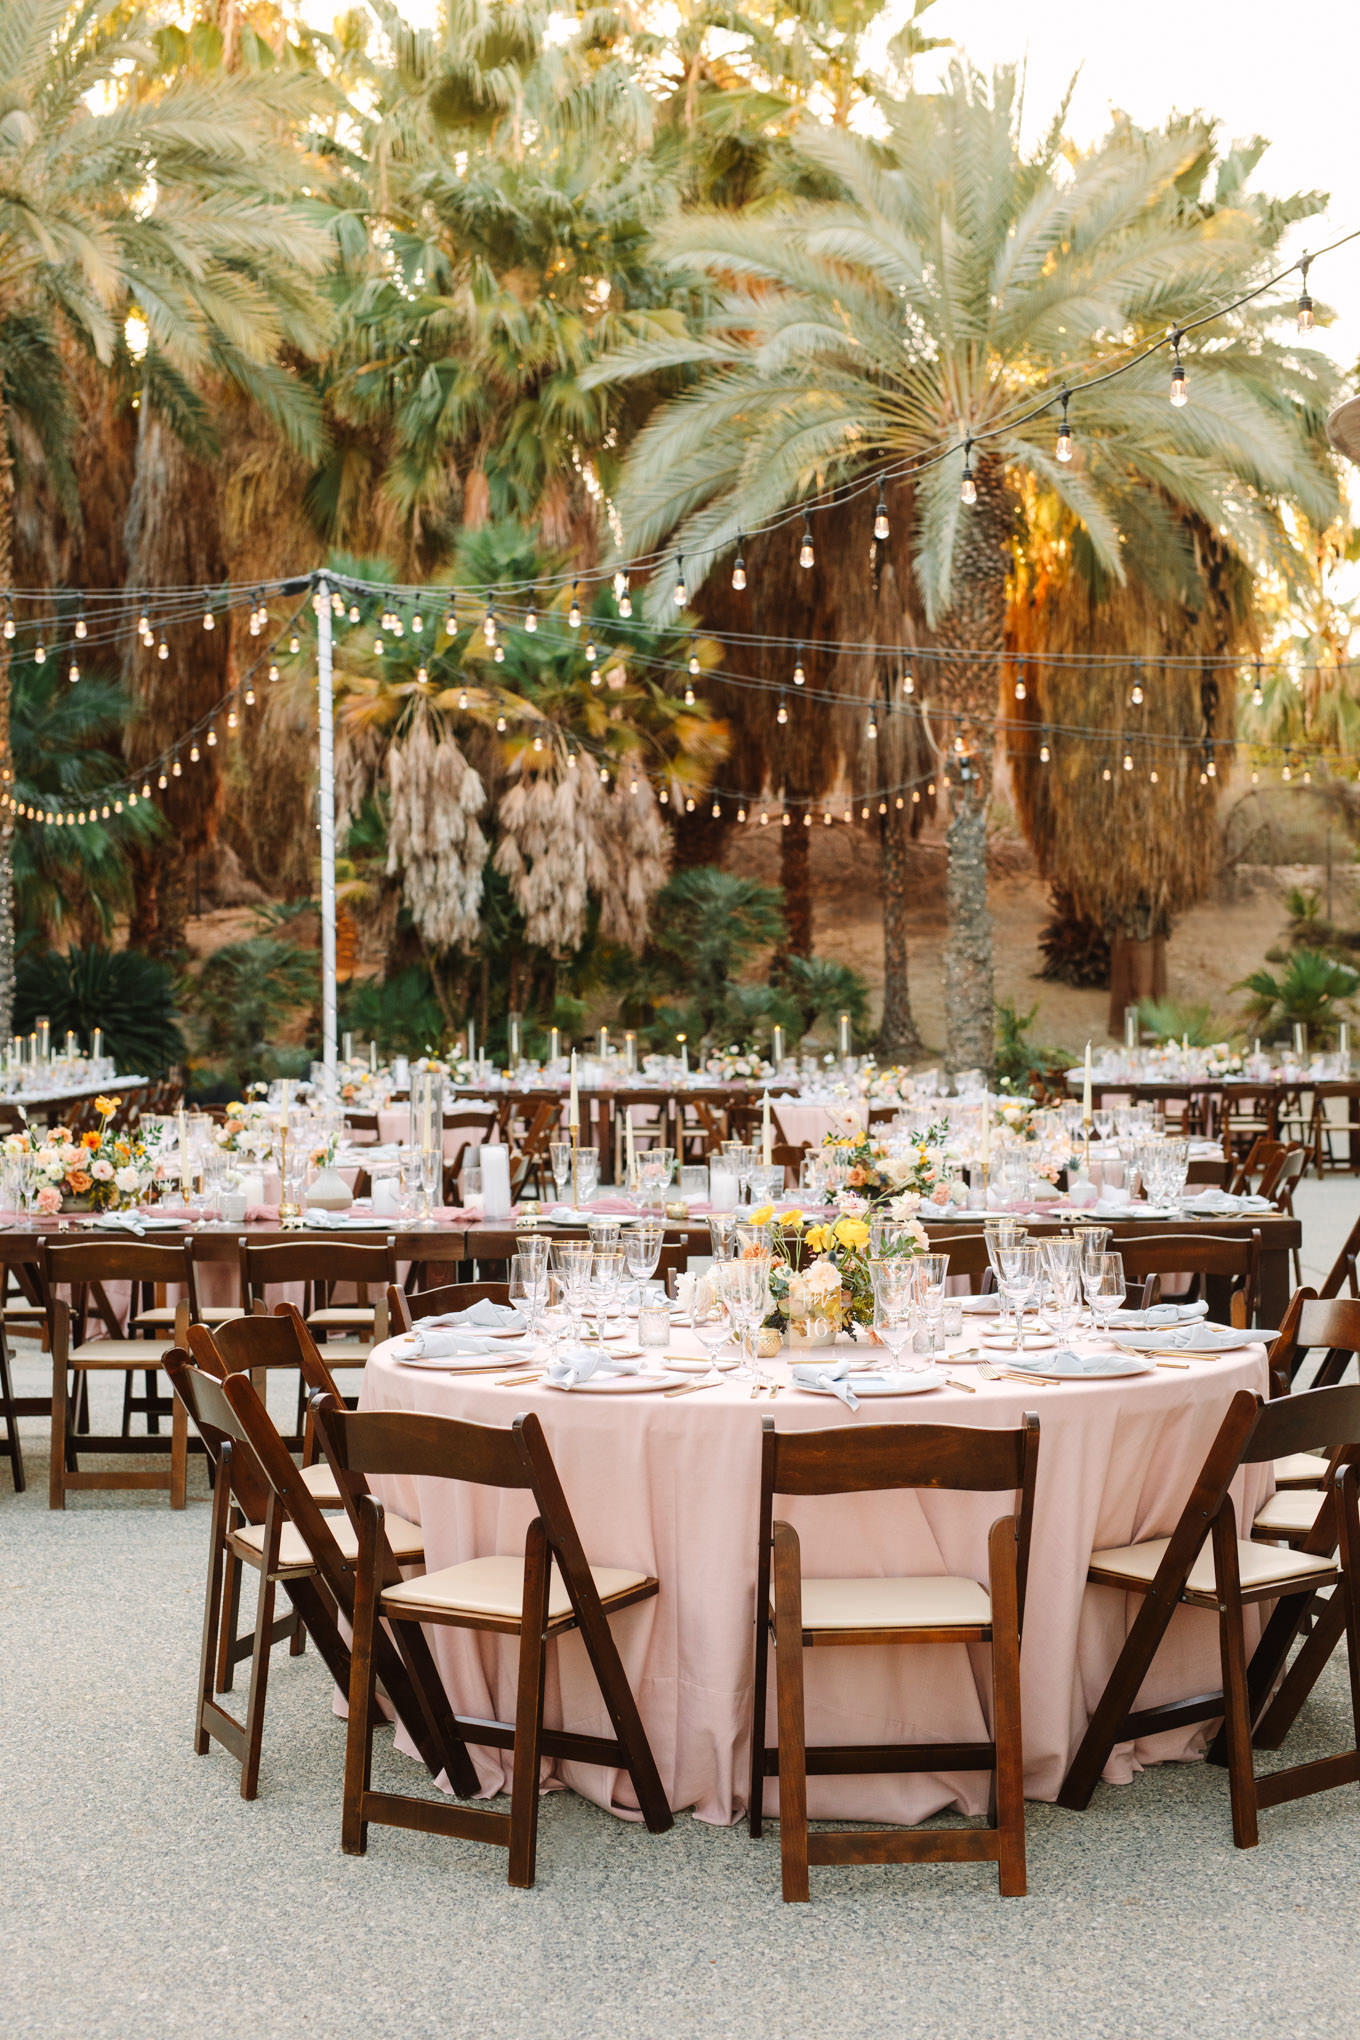 Blush wedding reception table in palm garden | Living Desert Zoo & Gardens wedding with unique details | Elevated and colorful wedding photography for fun-loving couples in Southern California |  #PalmSprings #palmspringsphotographer #gardenwedding #palmspringswedding  Source: Mary Costa Photography | Los Angeles wedding photographer 